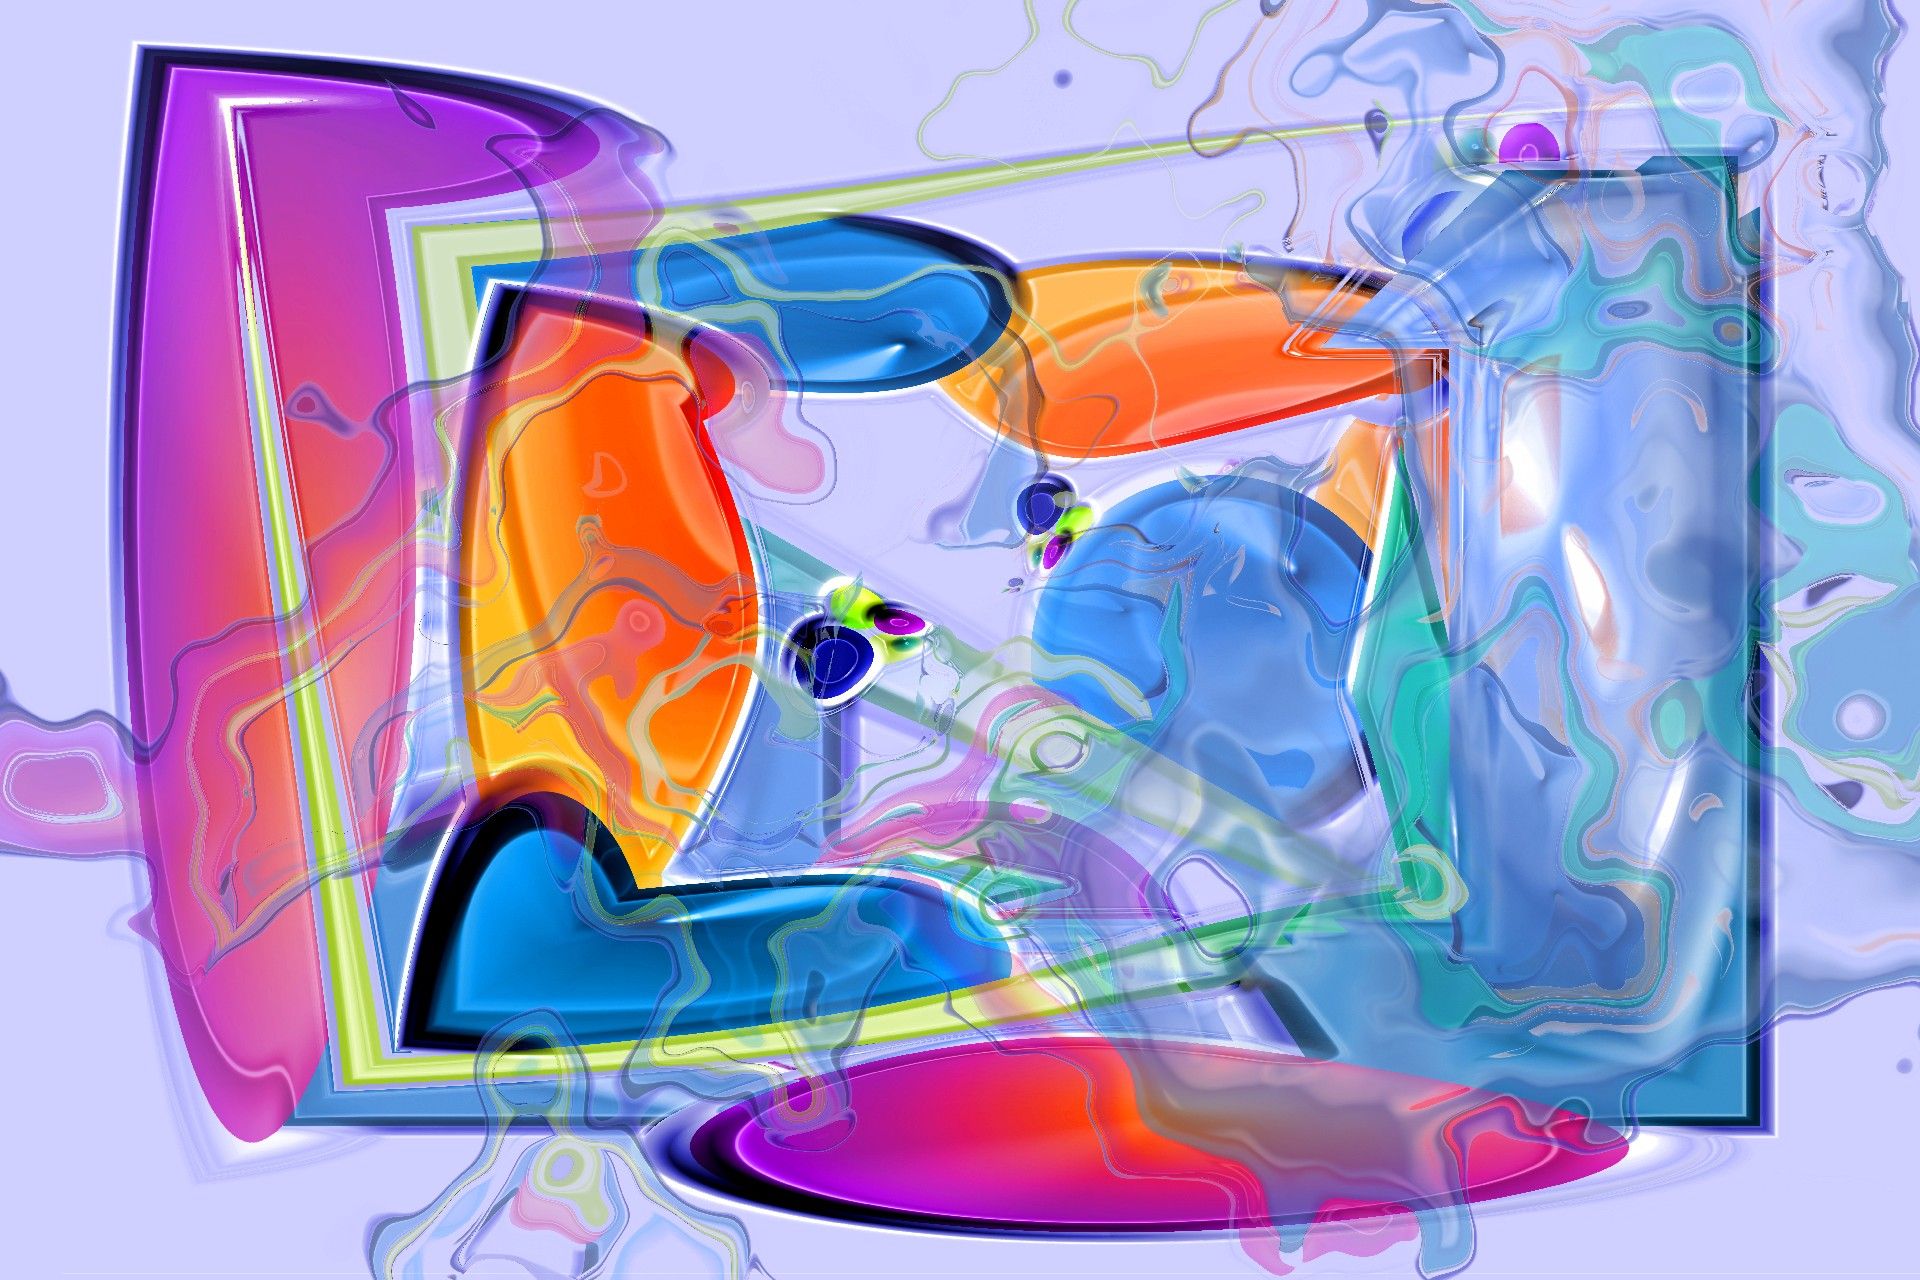 A vibrant and abstract fusion of shapes and colors, evoking a sense of fluidity and dynamism.